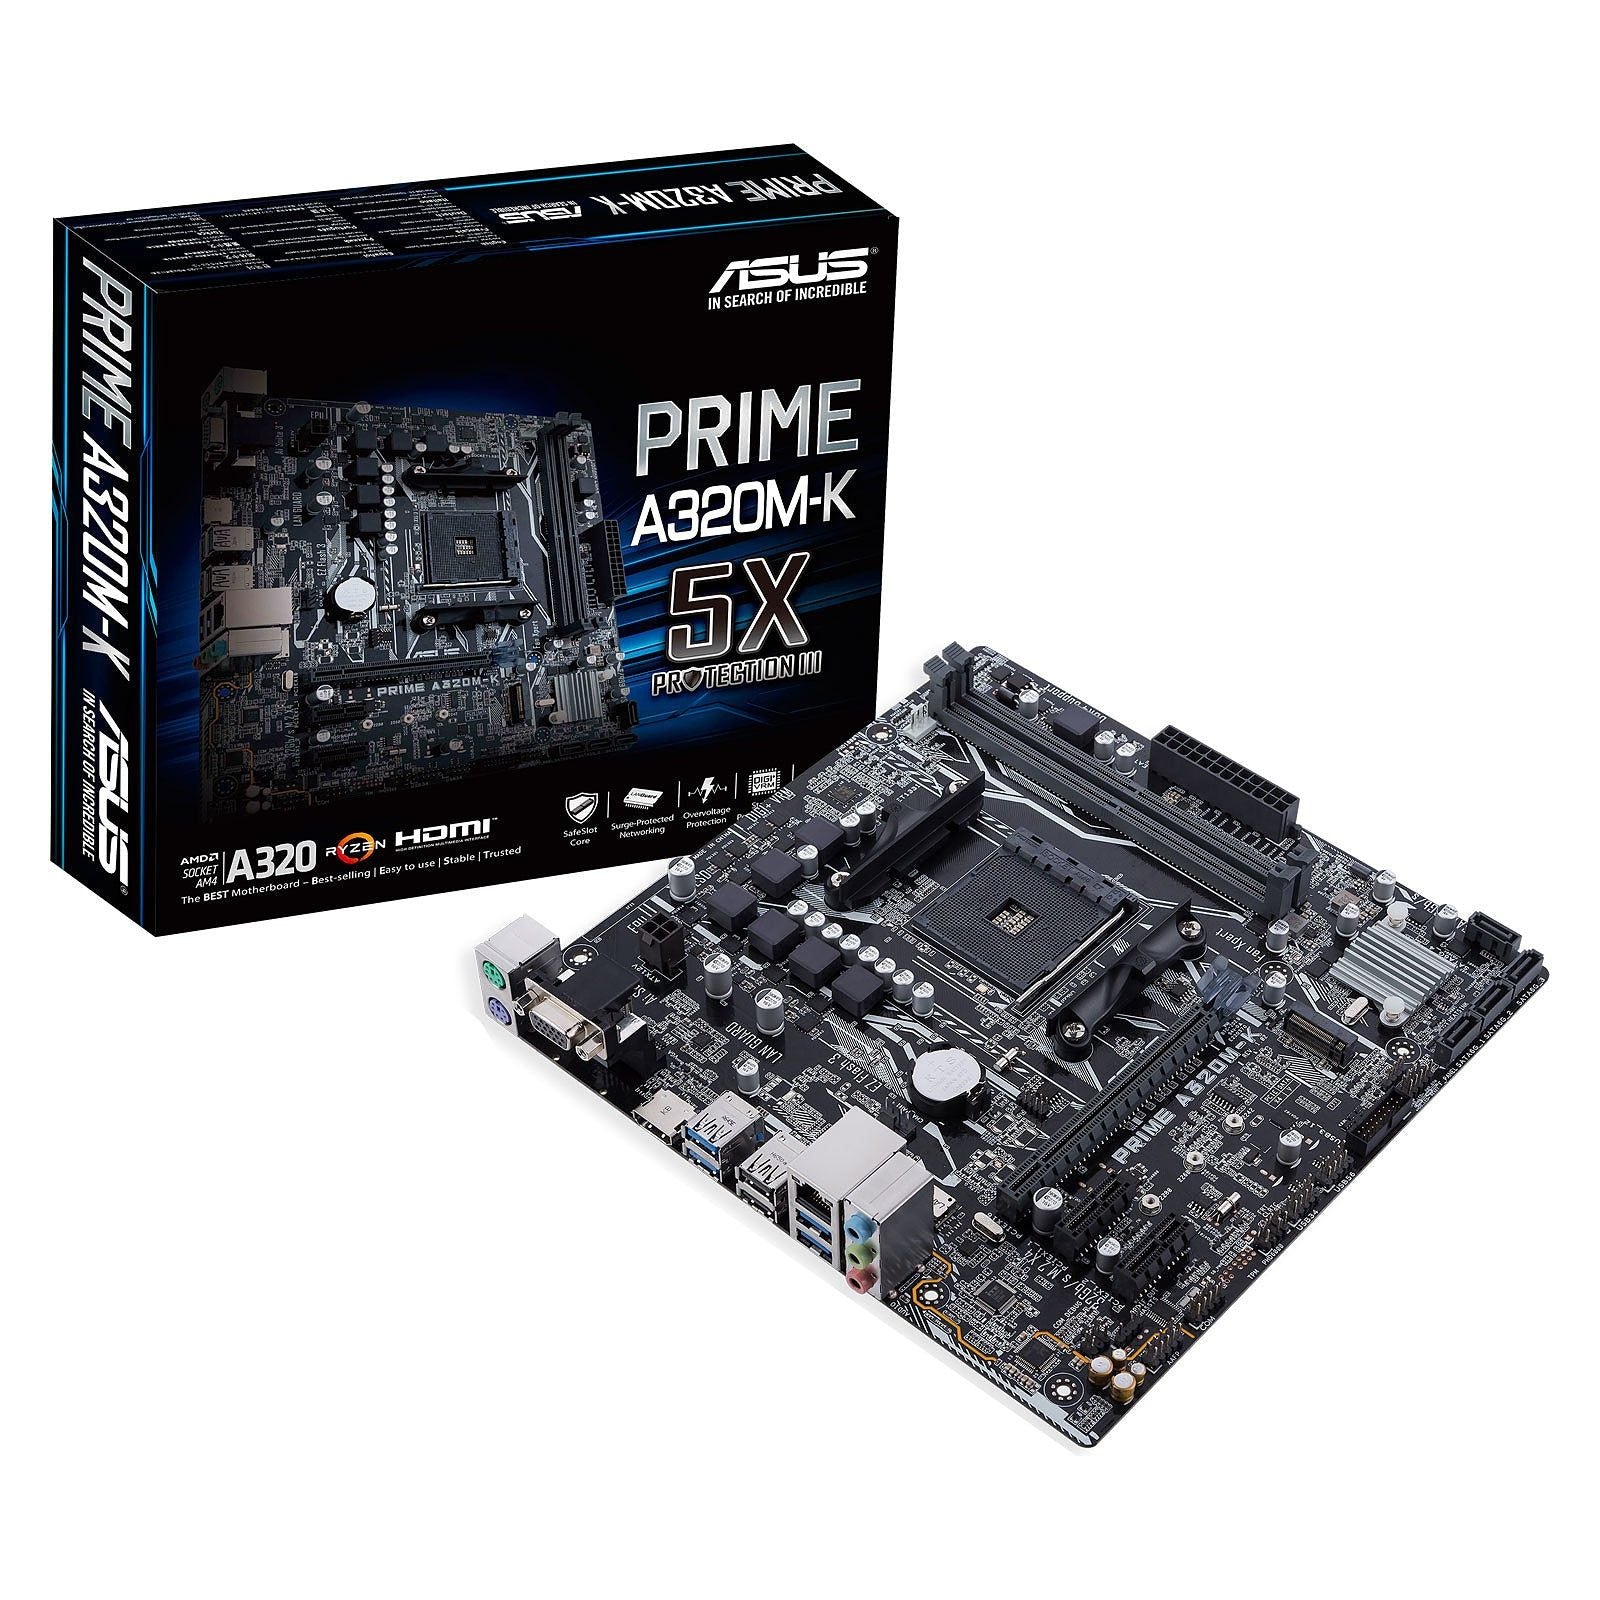 ASUS PRIME A320M-K - OVERCLOCK Computer